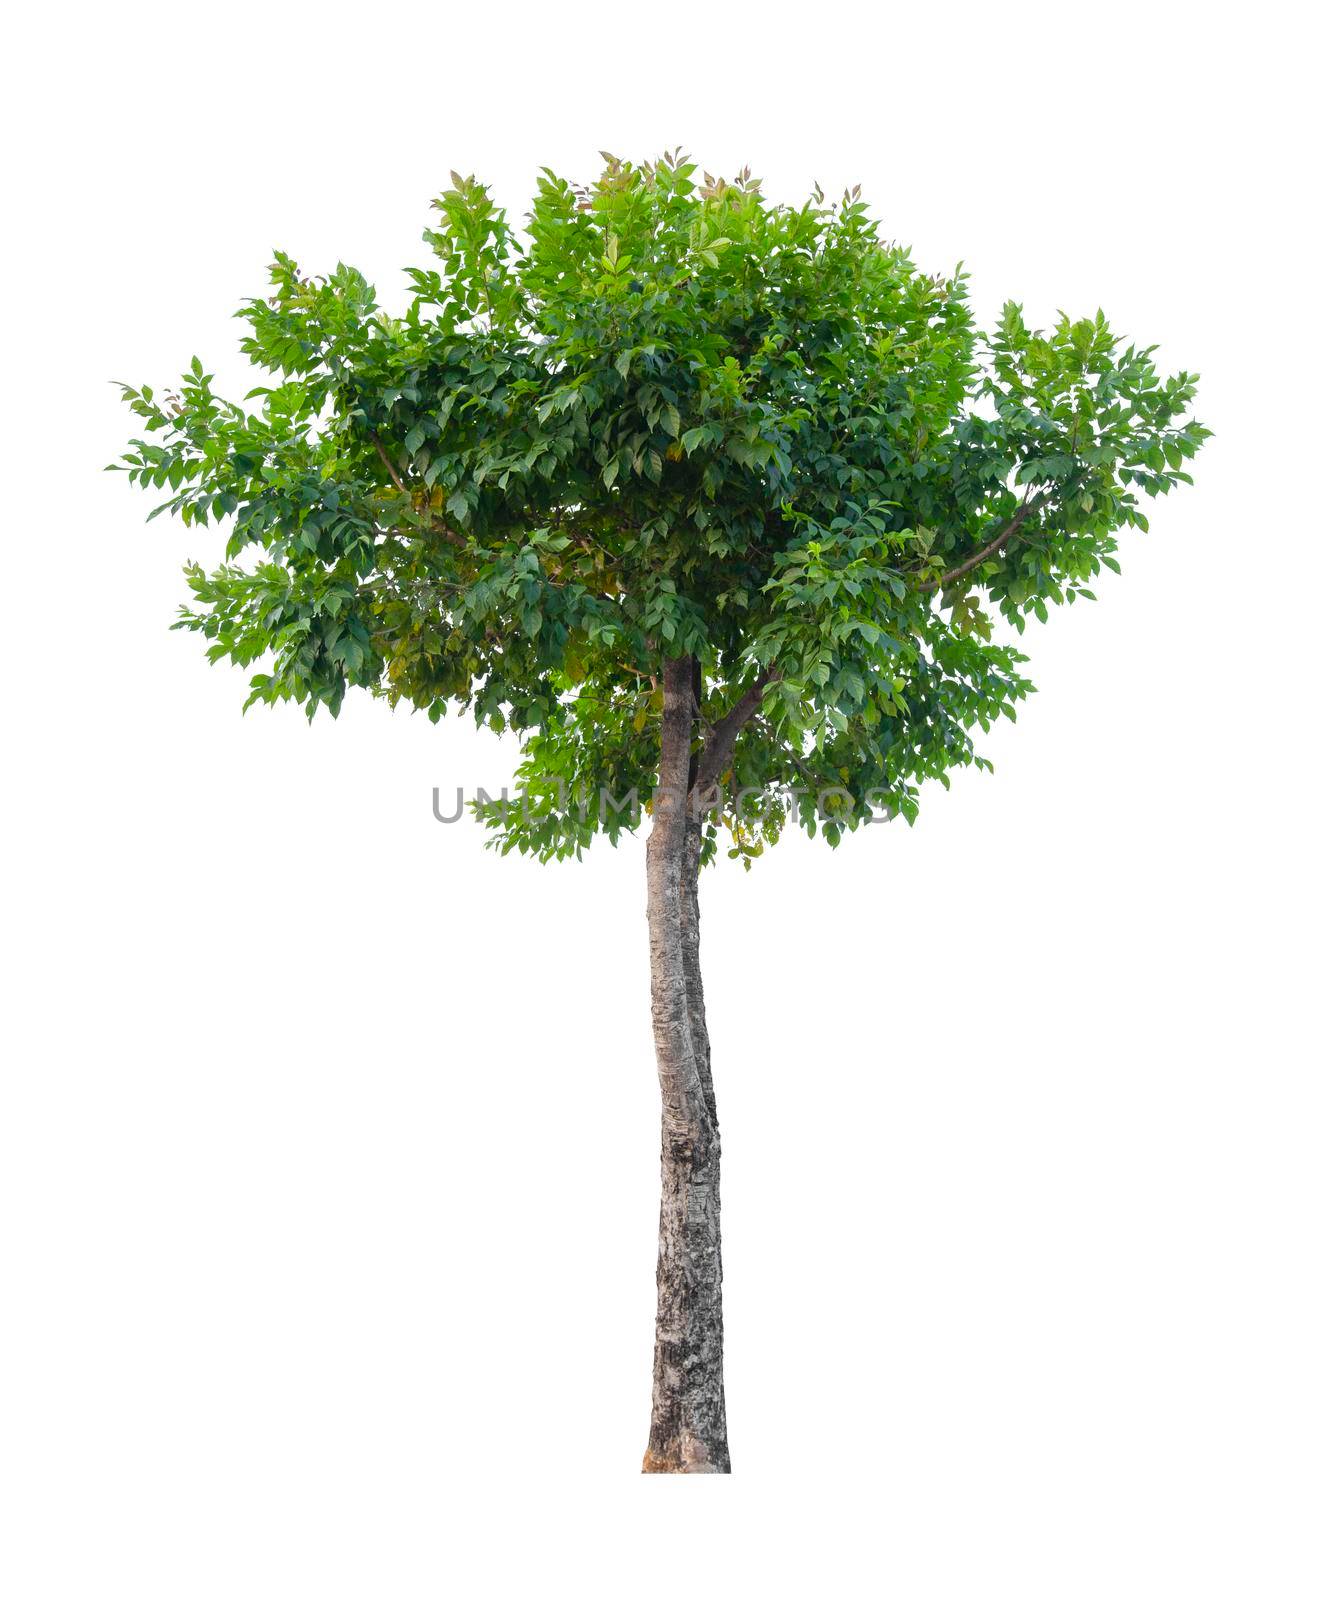 Tree isolated on white background, With Clipping path. by Gamjai